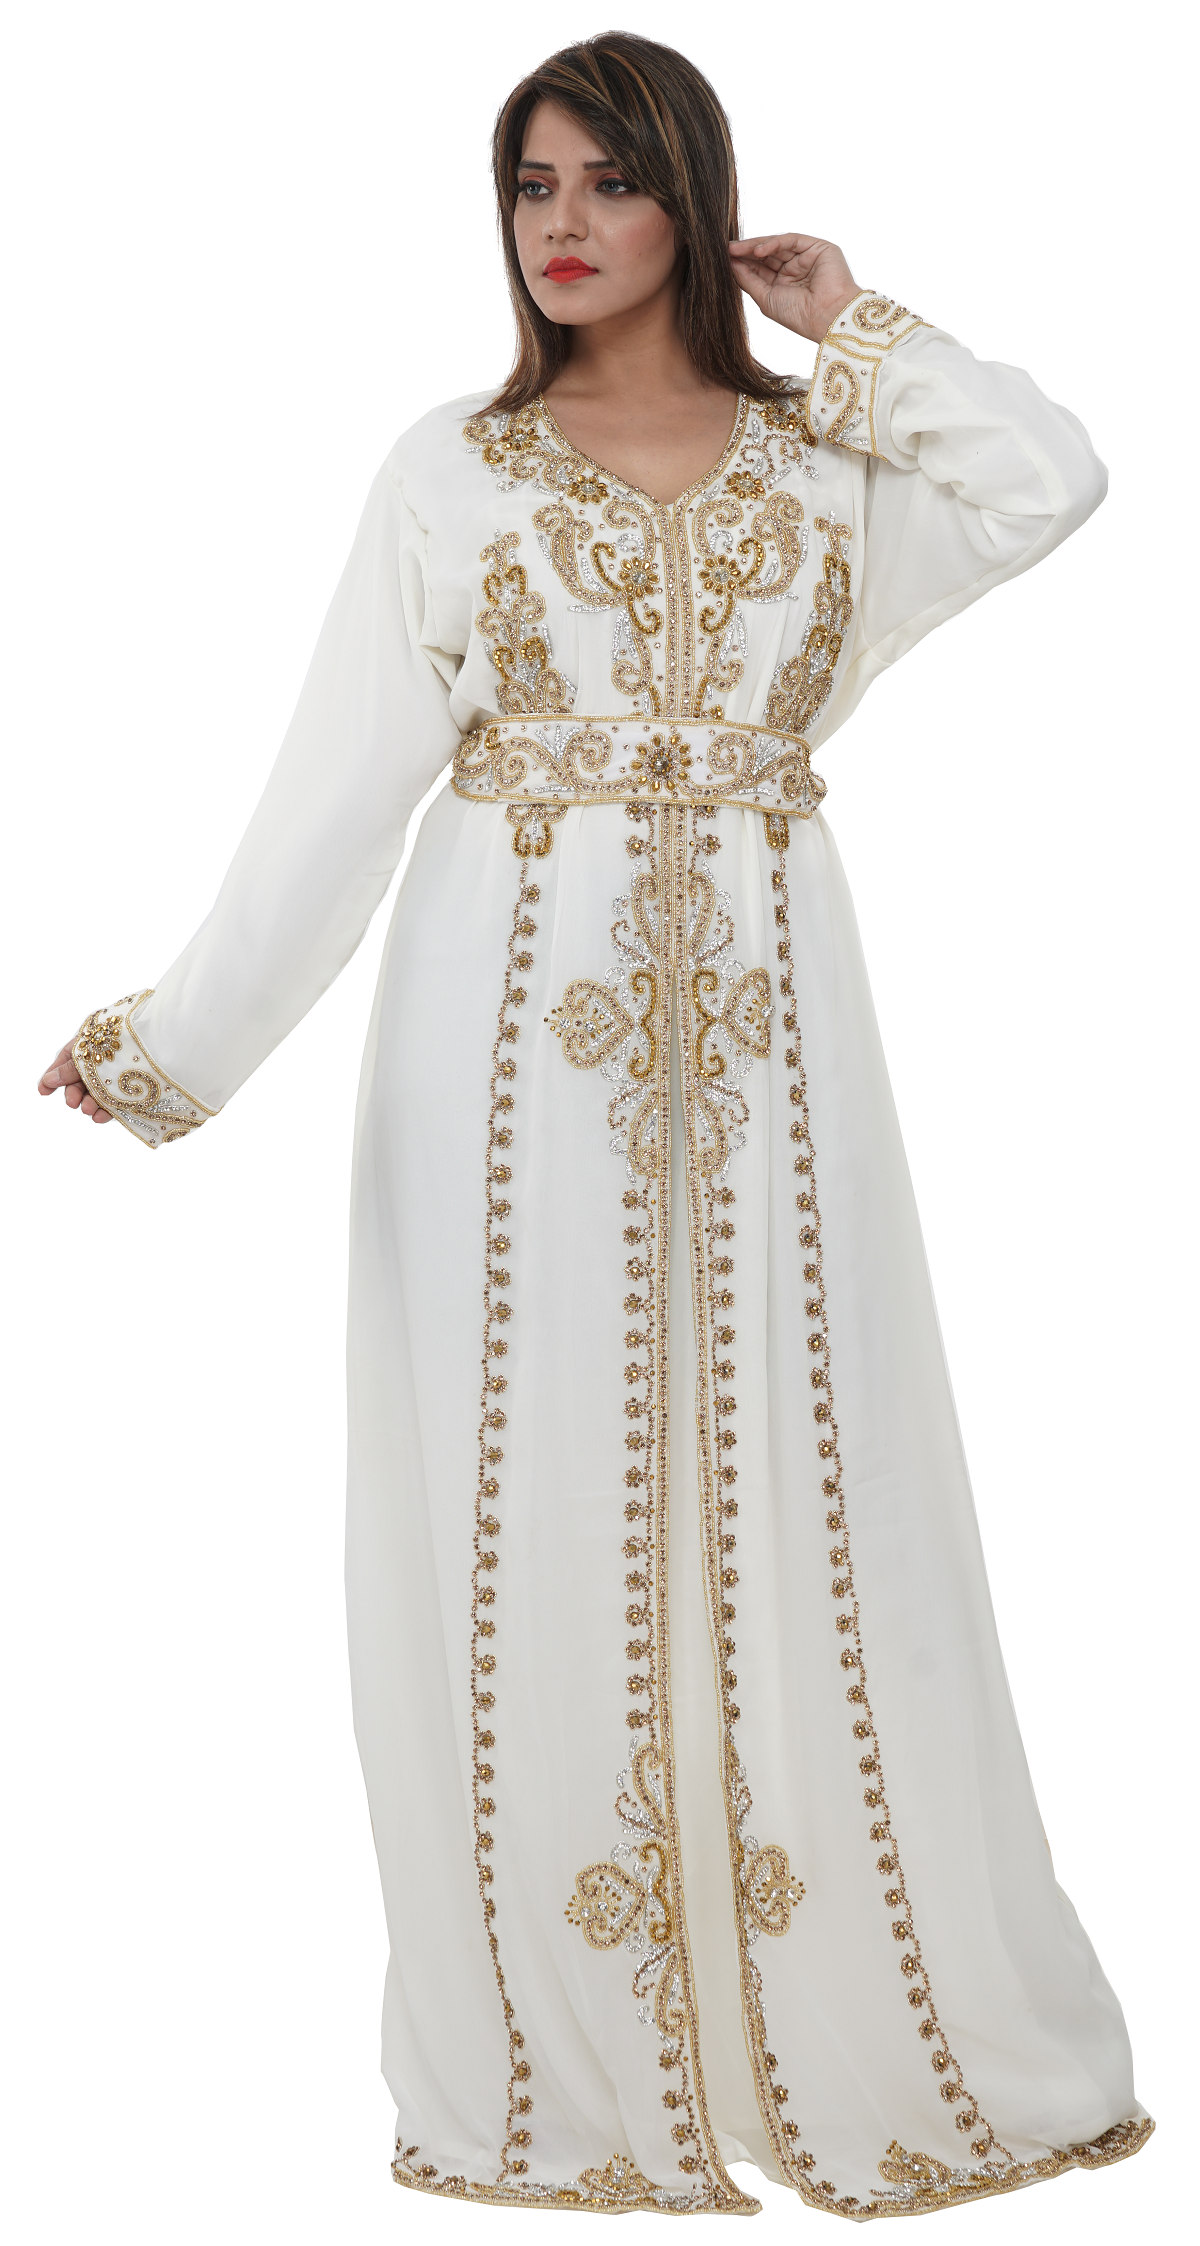 Load image into Gallery viewer, Embroidered Kaftan Gown With Golden Crystals - Maxim Creation
